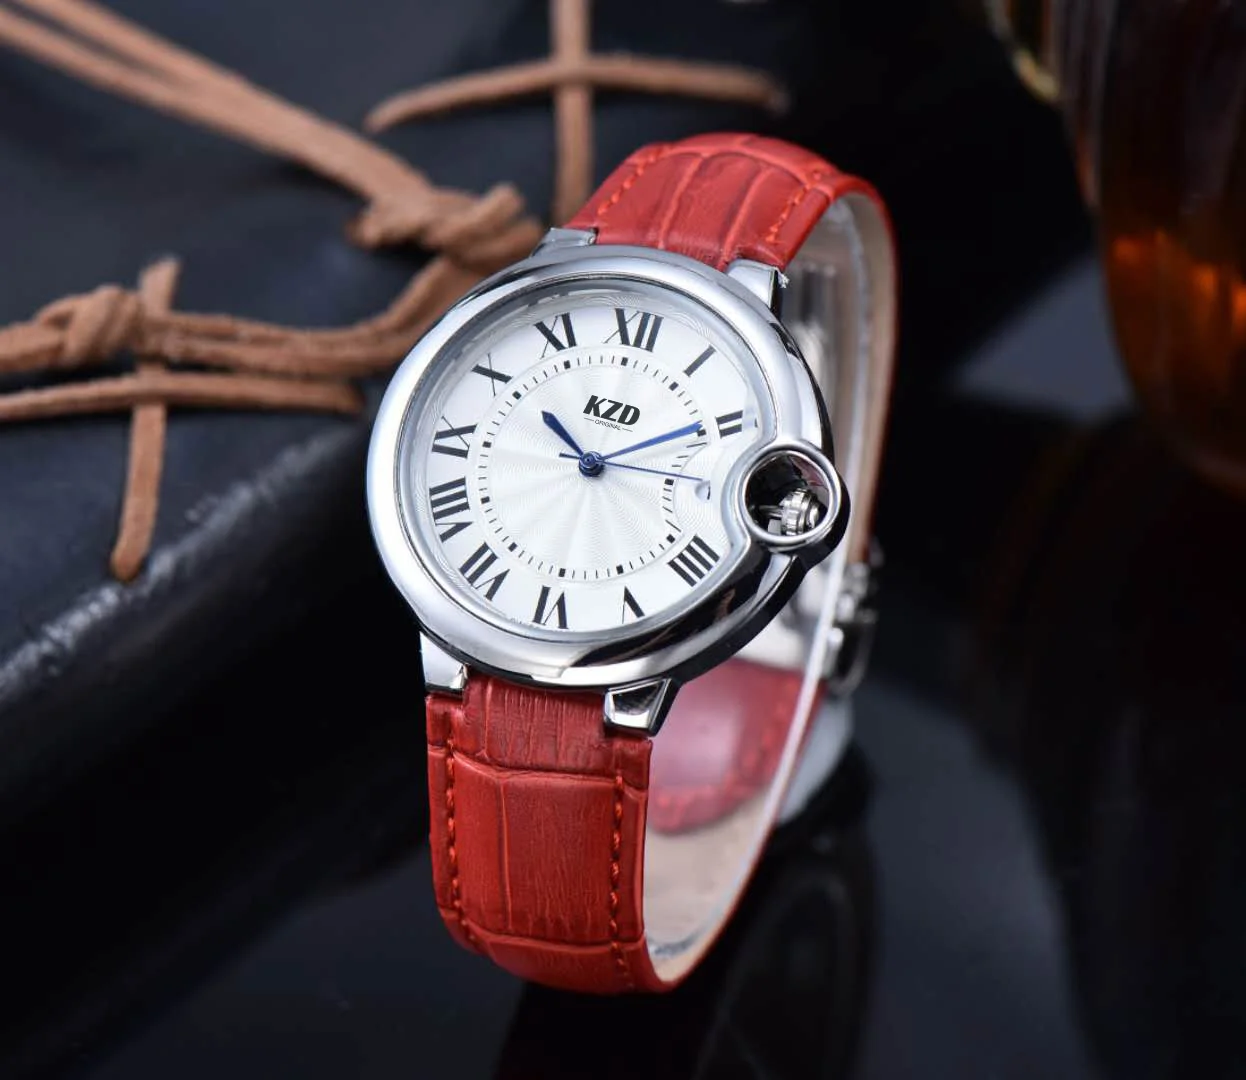 Original Brand Design High-end Ladies Exquisite Watch Quartz Movement Leather Waterproof AAA Clock Valentine's Day Recommended